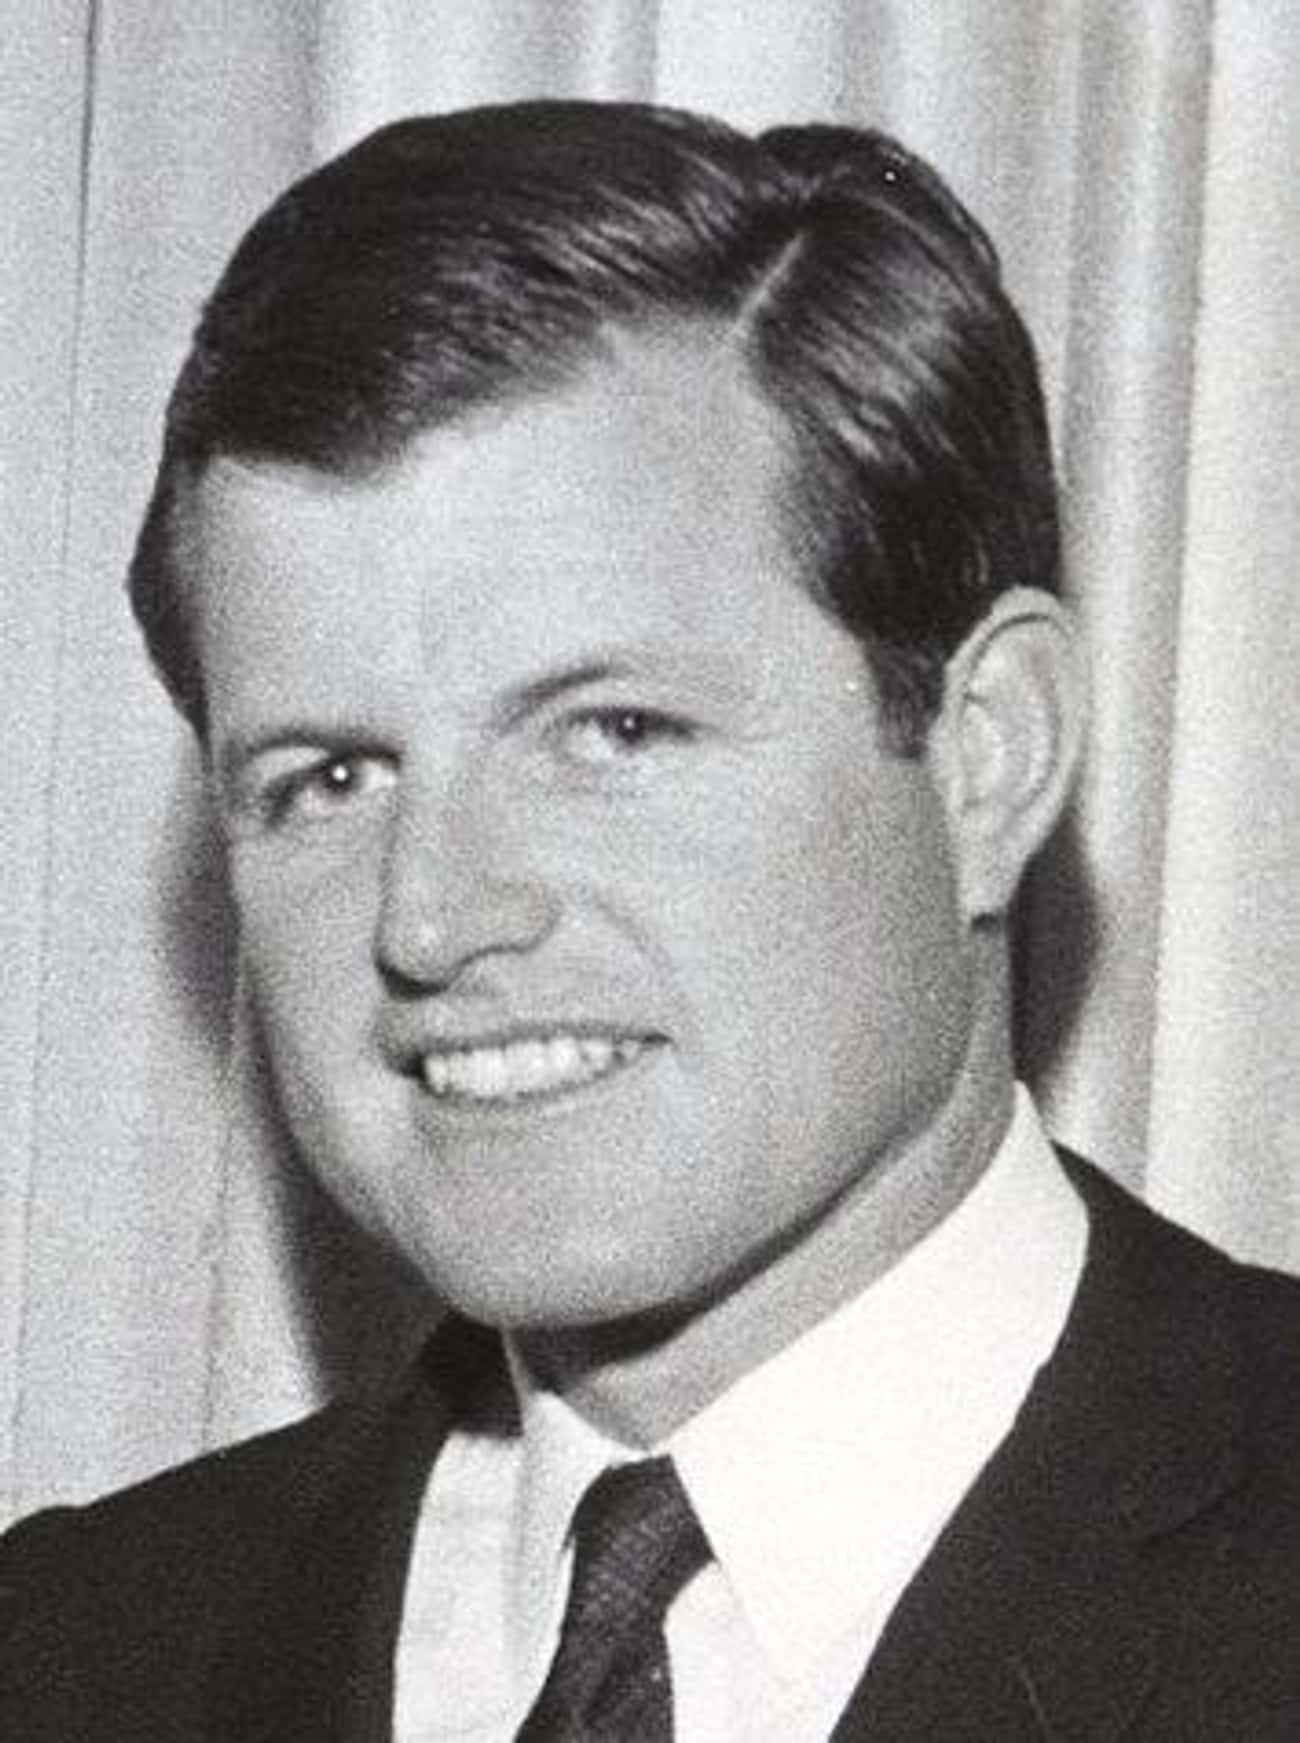 Ted Kennedy Was Hosting A Party On Chappaquiddick Island For Women That Had Worked On His Brother's Presidential Campaign